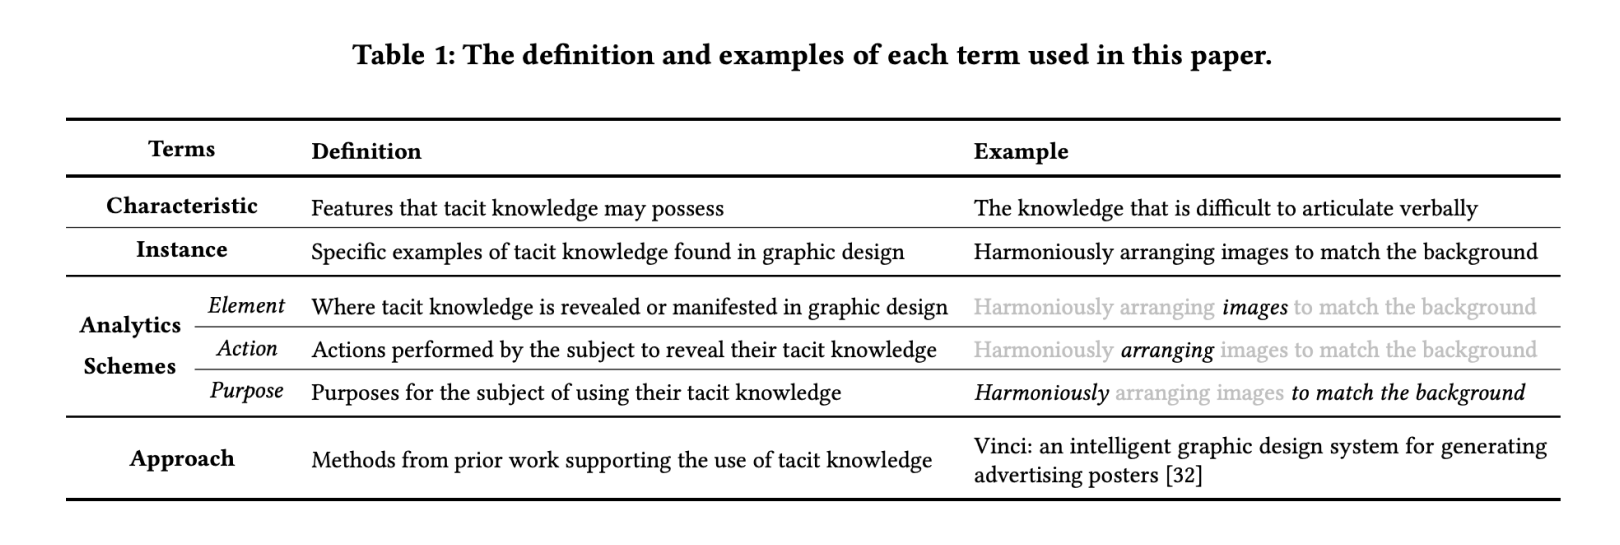 The definition and examples of each term used in this paper.